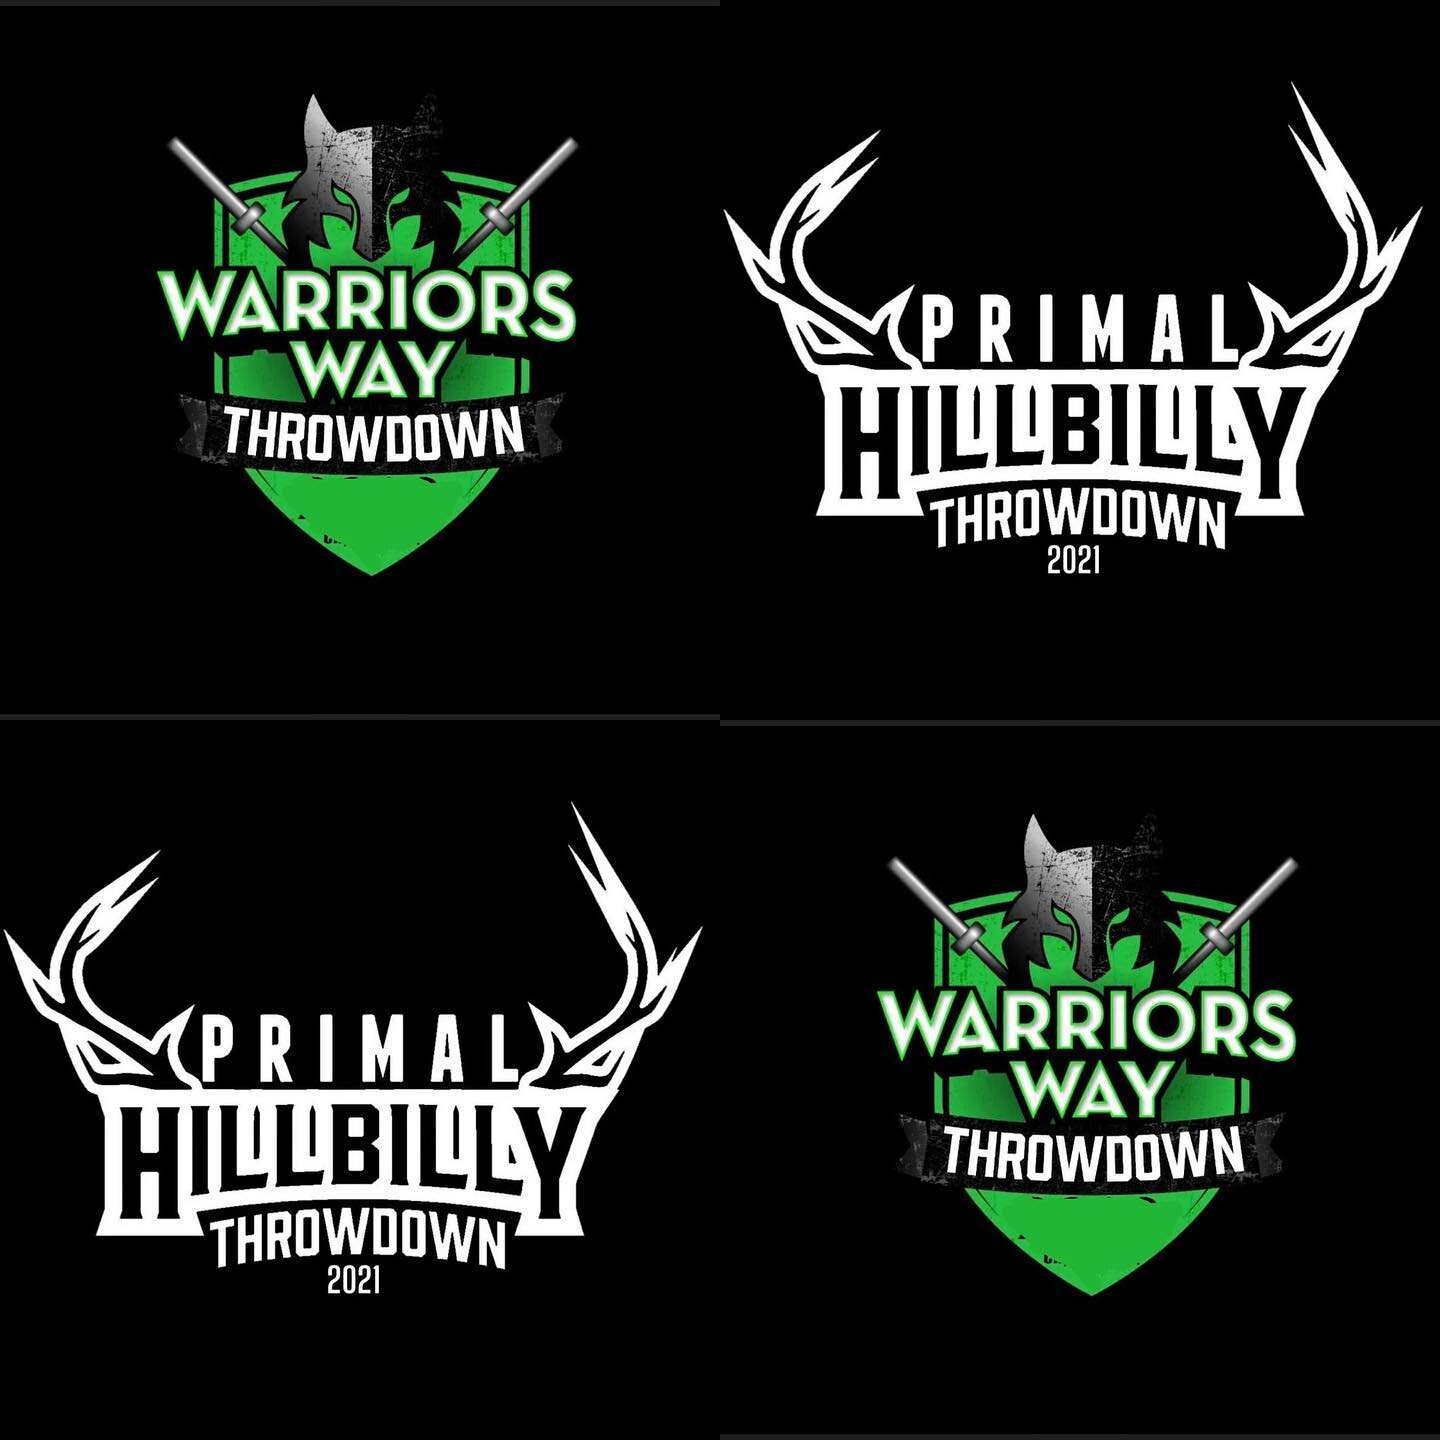 Best of luck to all the CrossFit Gorey athletes competing this weekend!
Debbie &amp; James are teaming up for the Warriors Way Throwdown while Jamie &amp; Mike take on the Hillbilly Throwdown. 

Best of luck everyone!!💪

#teamcfg #crossfit #crossfit